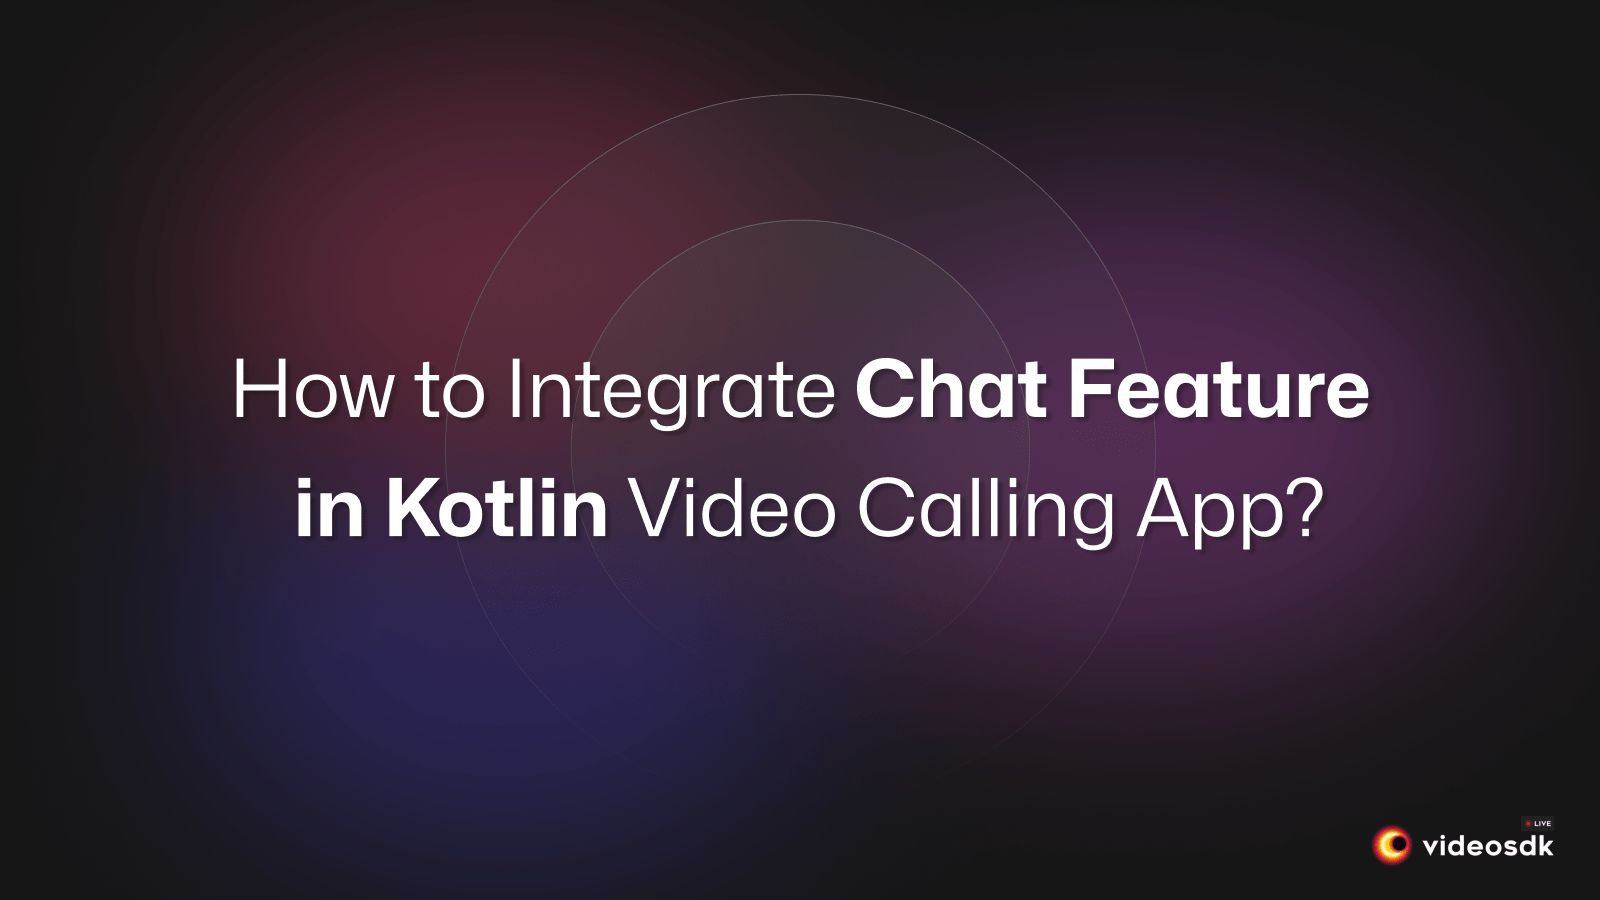 How to Integrate Chat Feature in Android(Kotlin) Video Calling App?